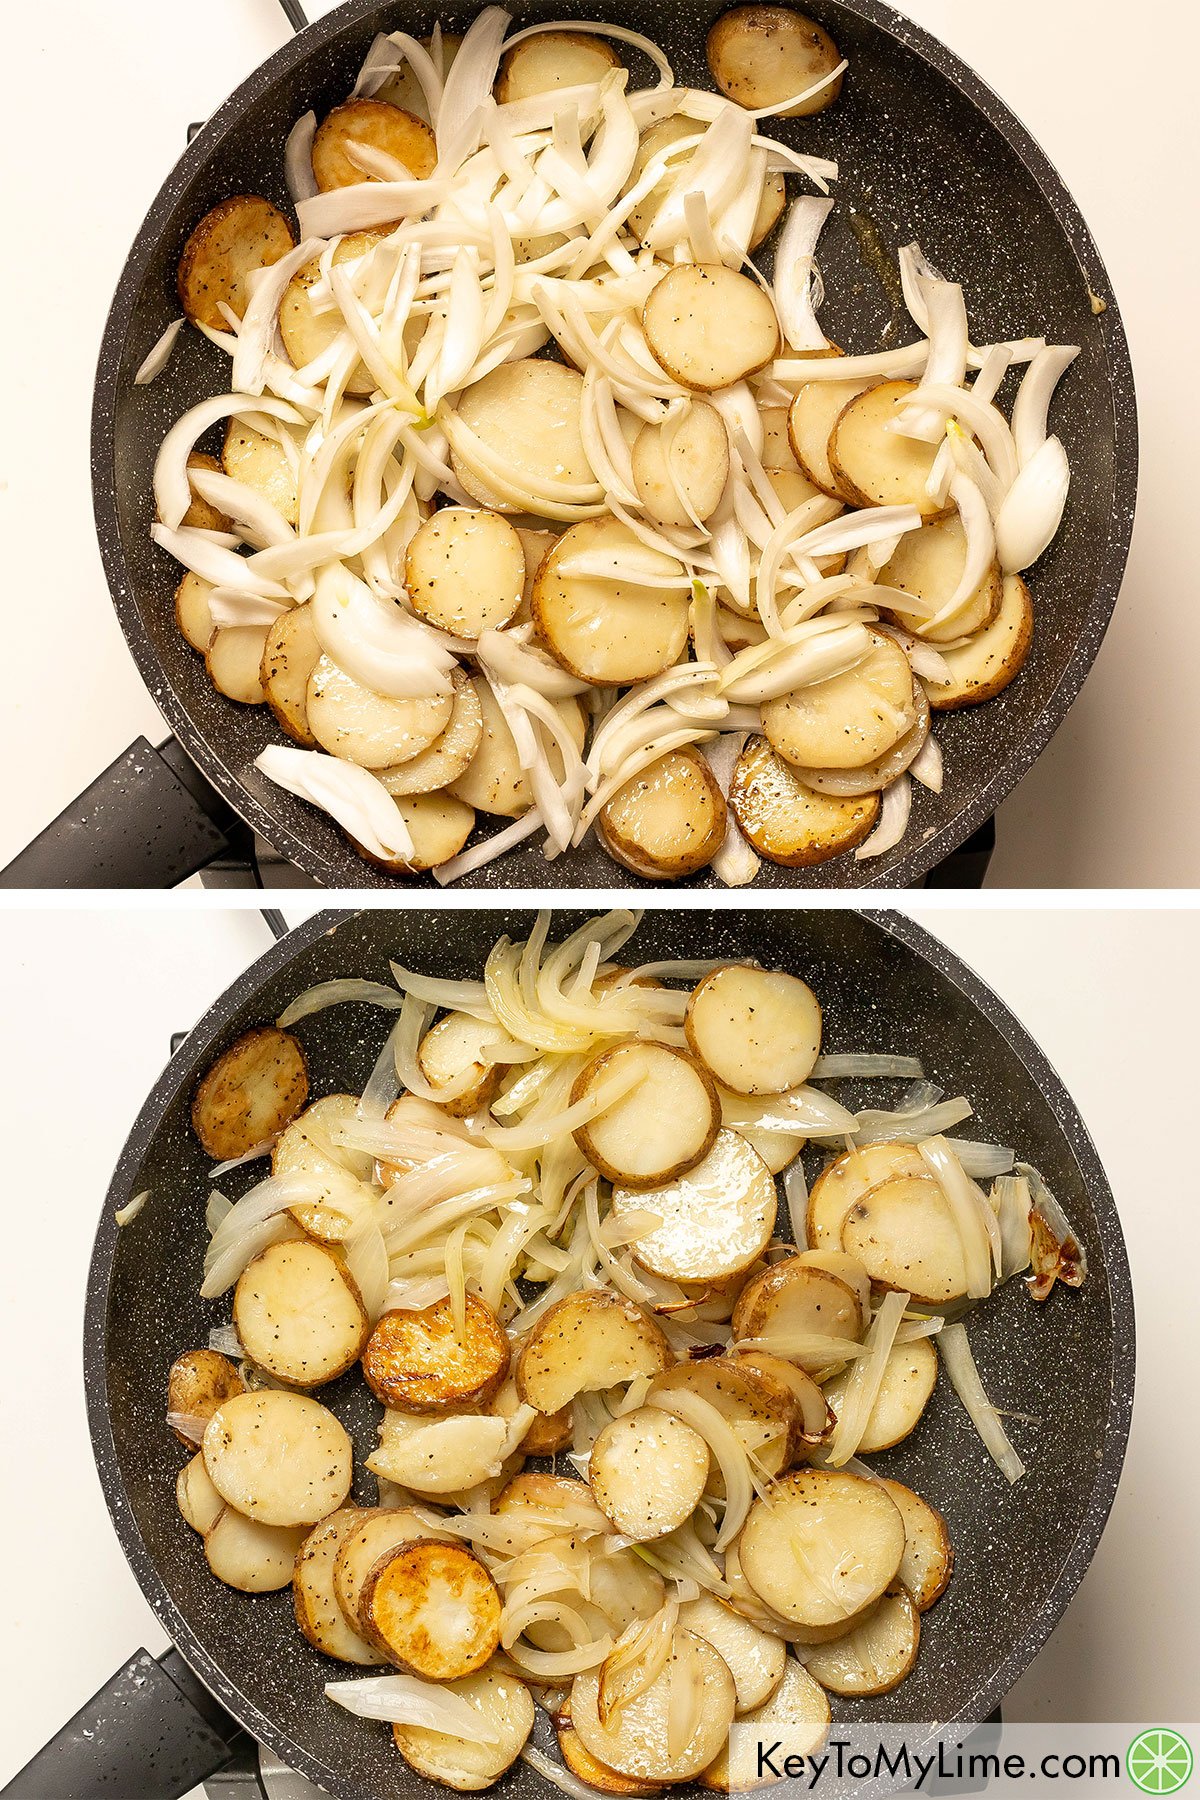 Adding onion slices to the partially  cooked potatoes and cooking until translucent.